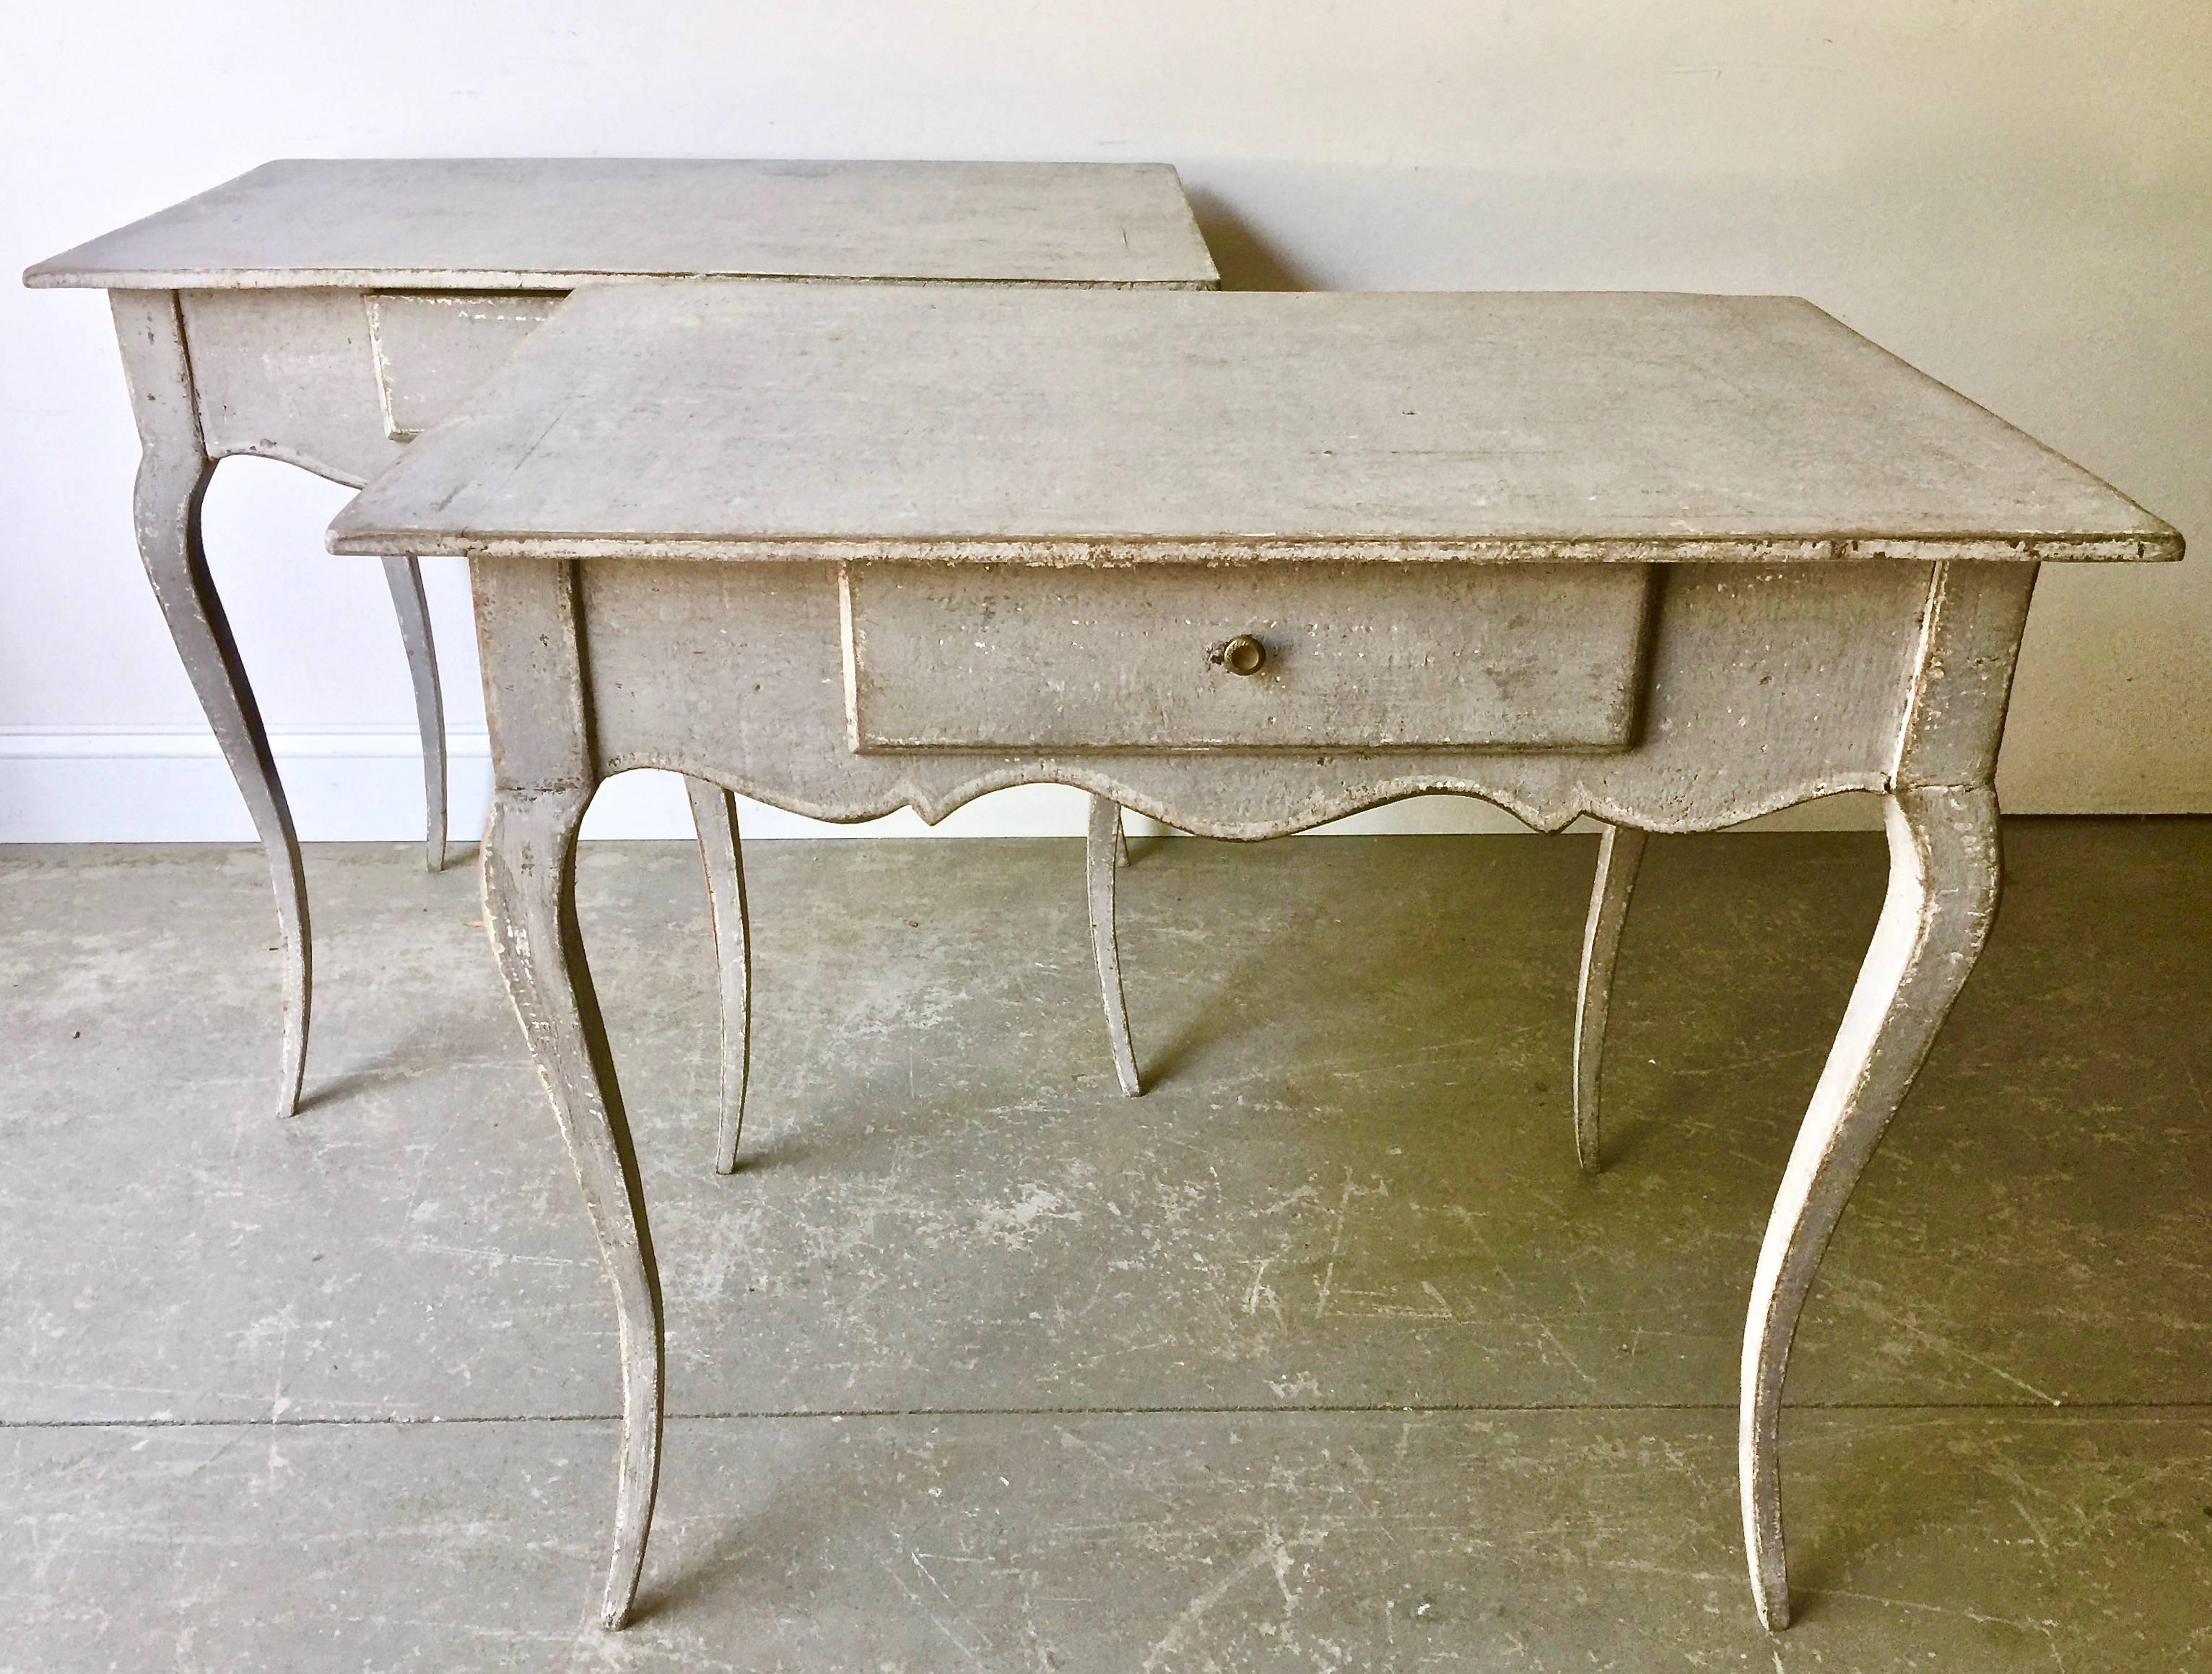 Pair of 19th century Louis XV style painted tables with beautifully carved apron with a cut out hart, single drawer and elegant slender tapering cabriole legs, France, circa 1880.
Here are few examples. Surprising pieces and objects, authentic,